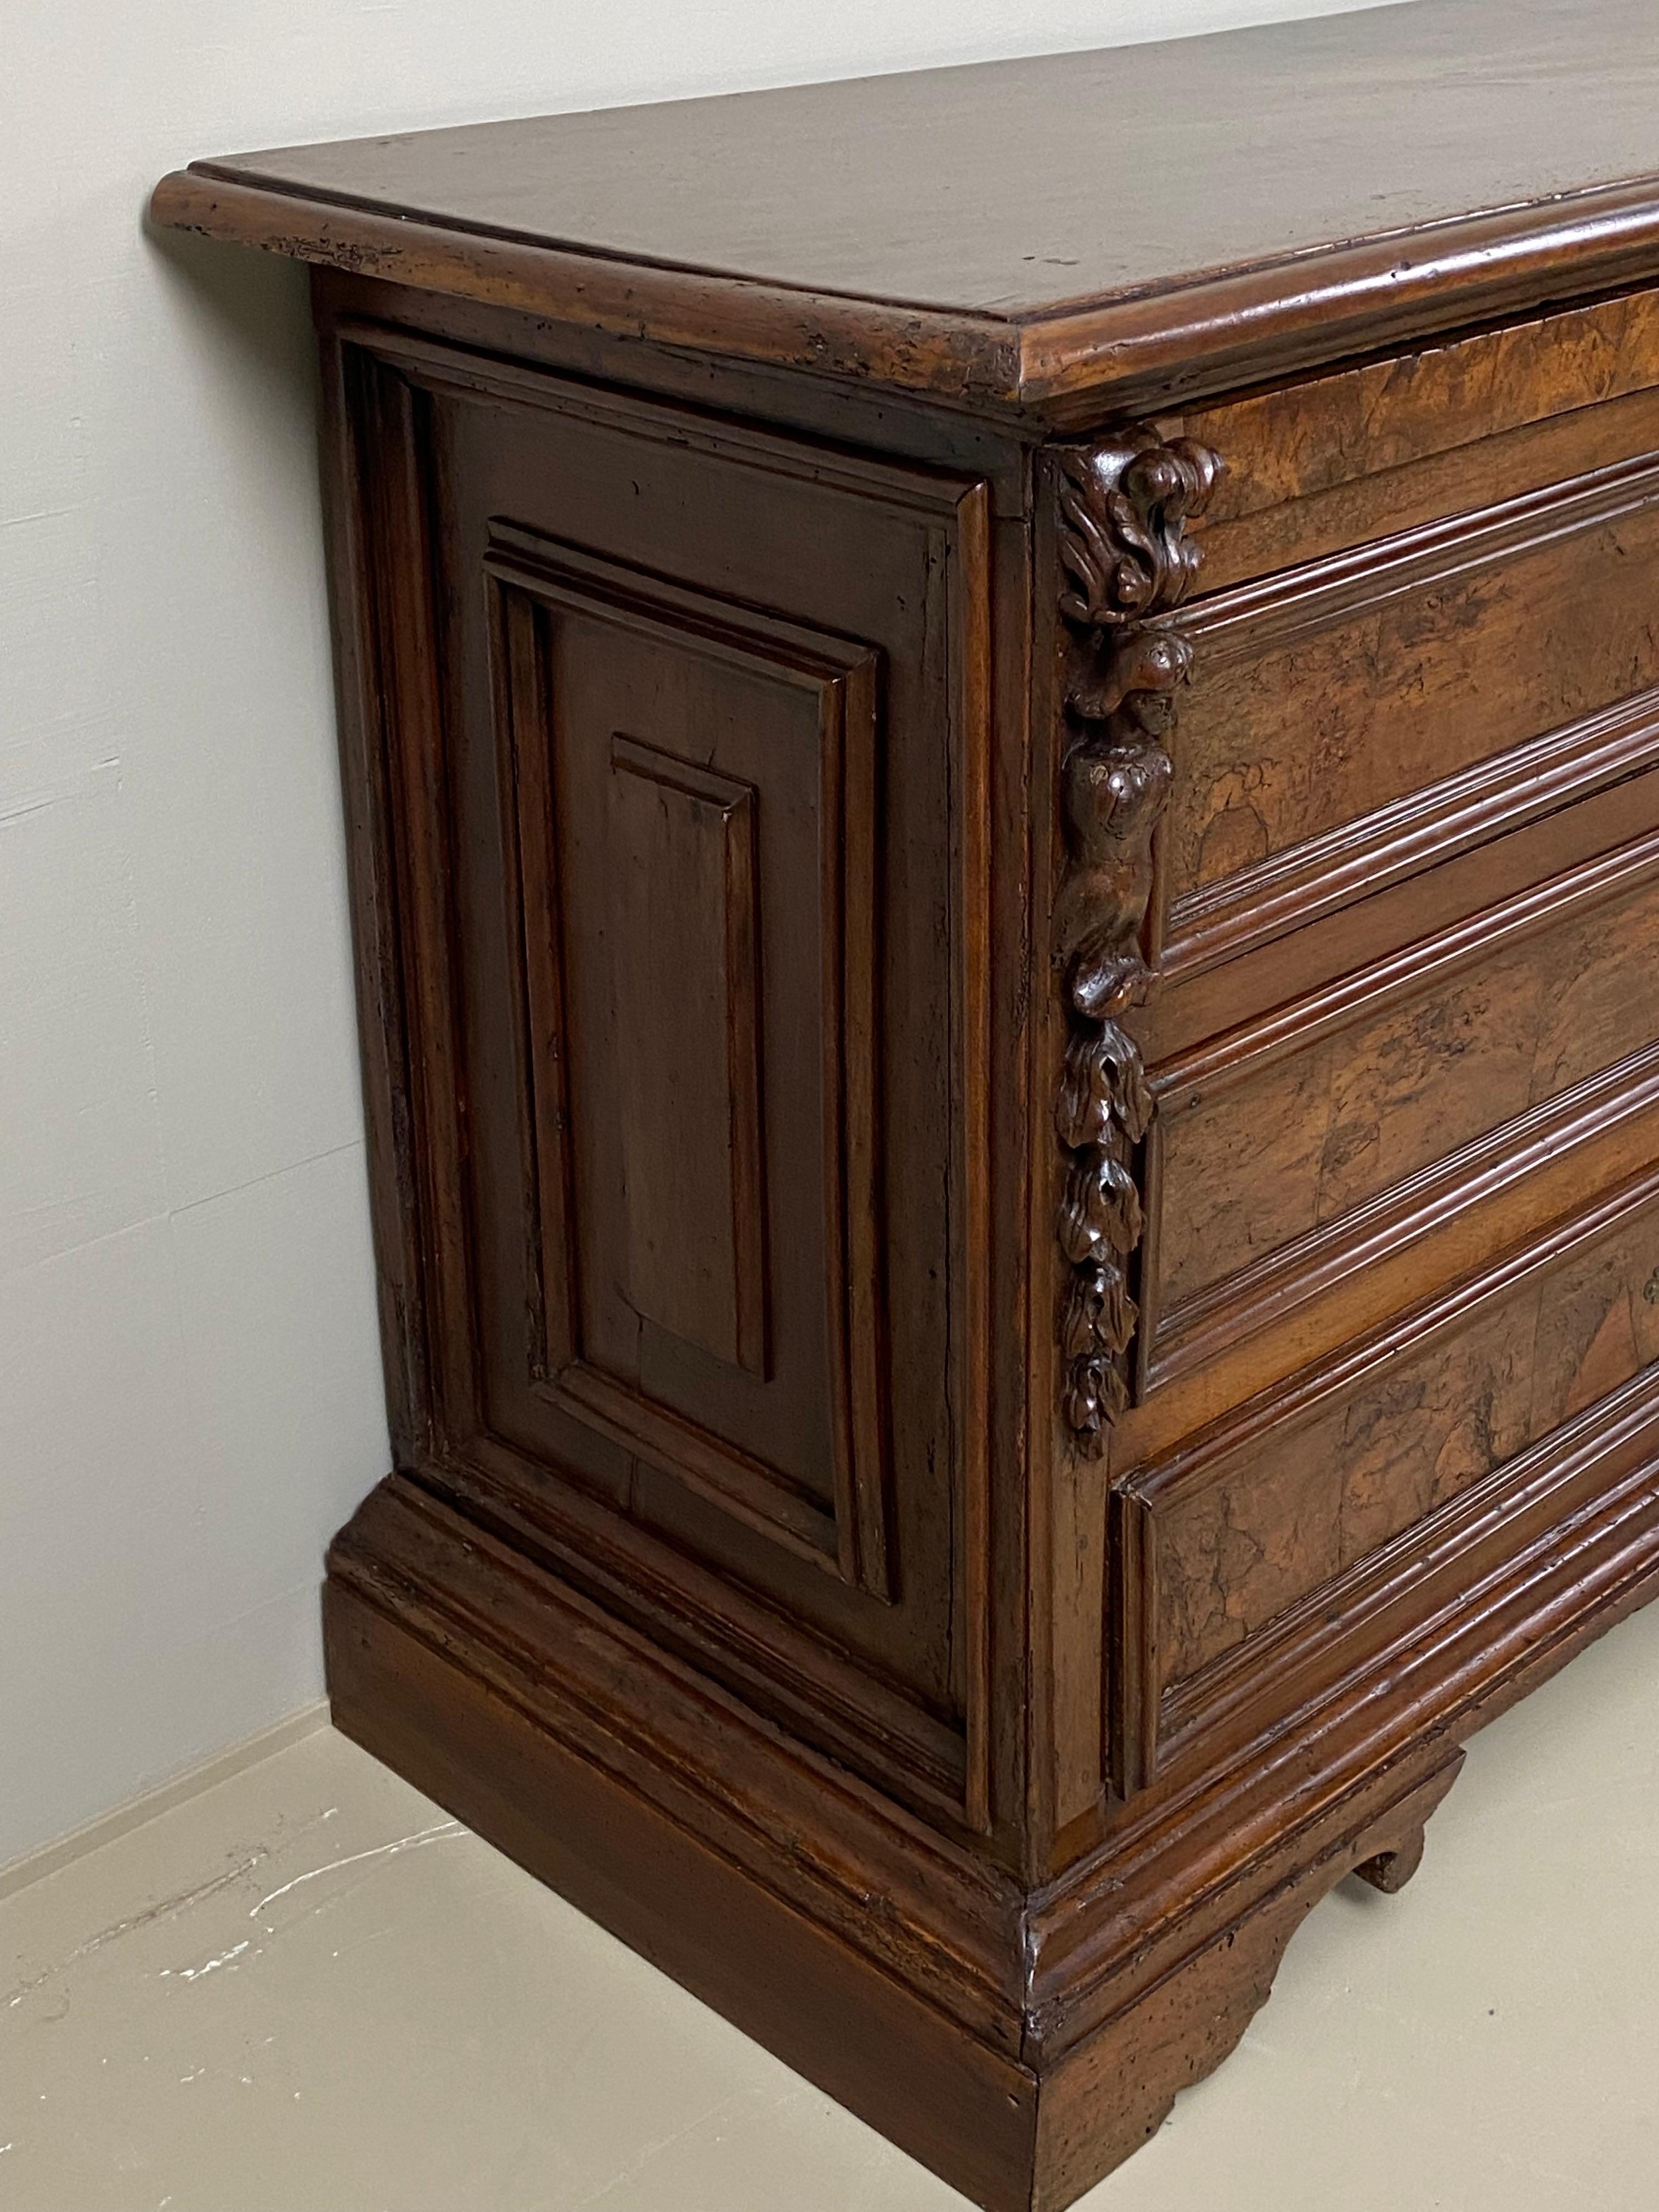 Walnut Antique Chest of Drawers, Italy, Tuscany, 18 th Century